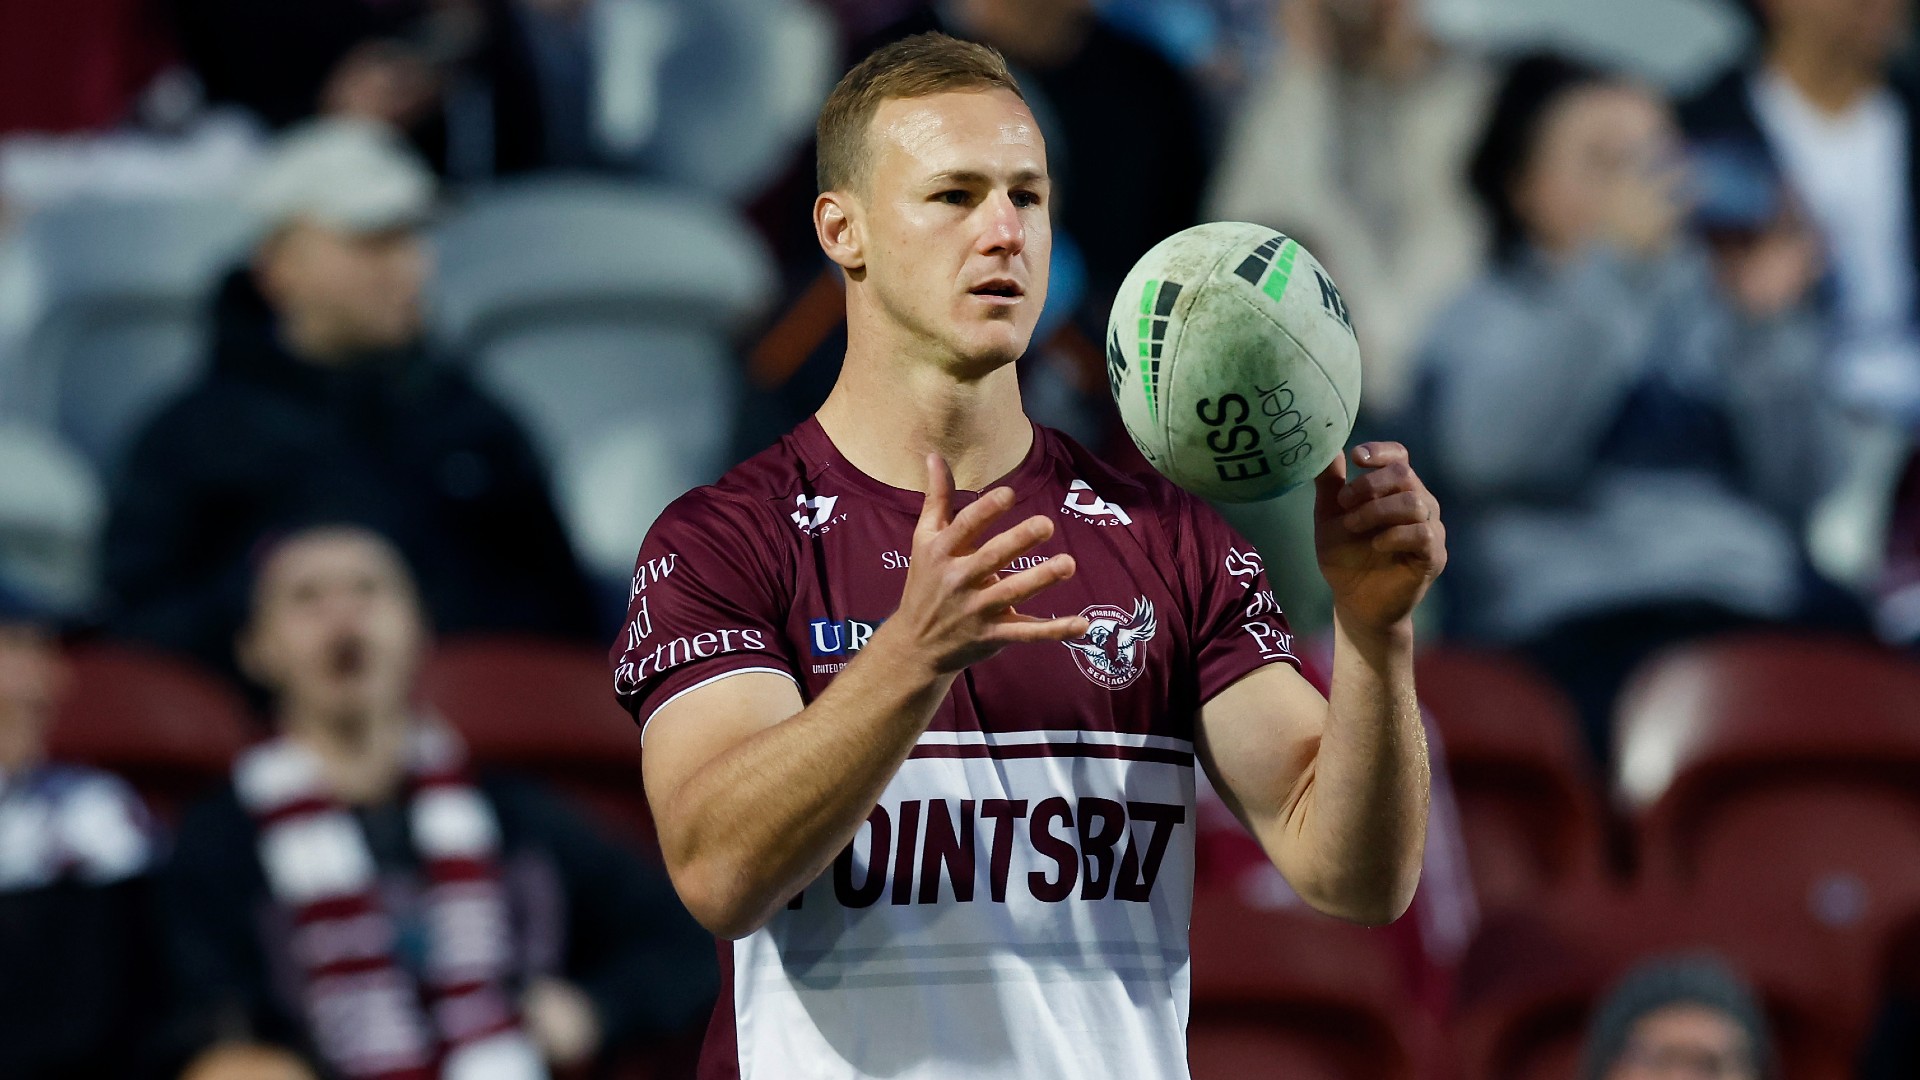 Manly captain Daly Cherry-Evans warms up before the NRL game against the St George Illawarra Dragons.